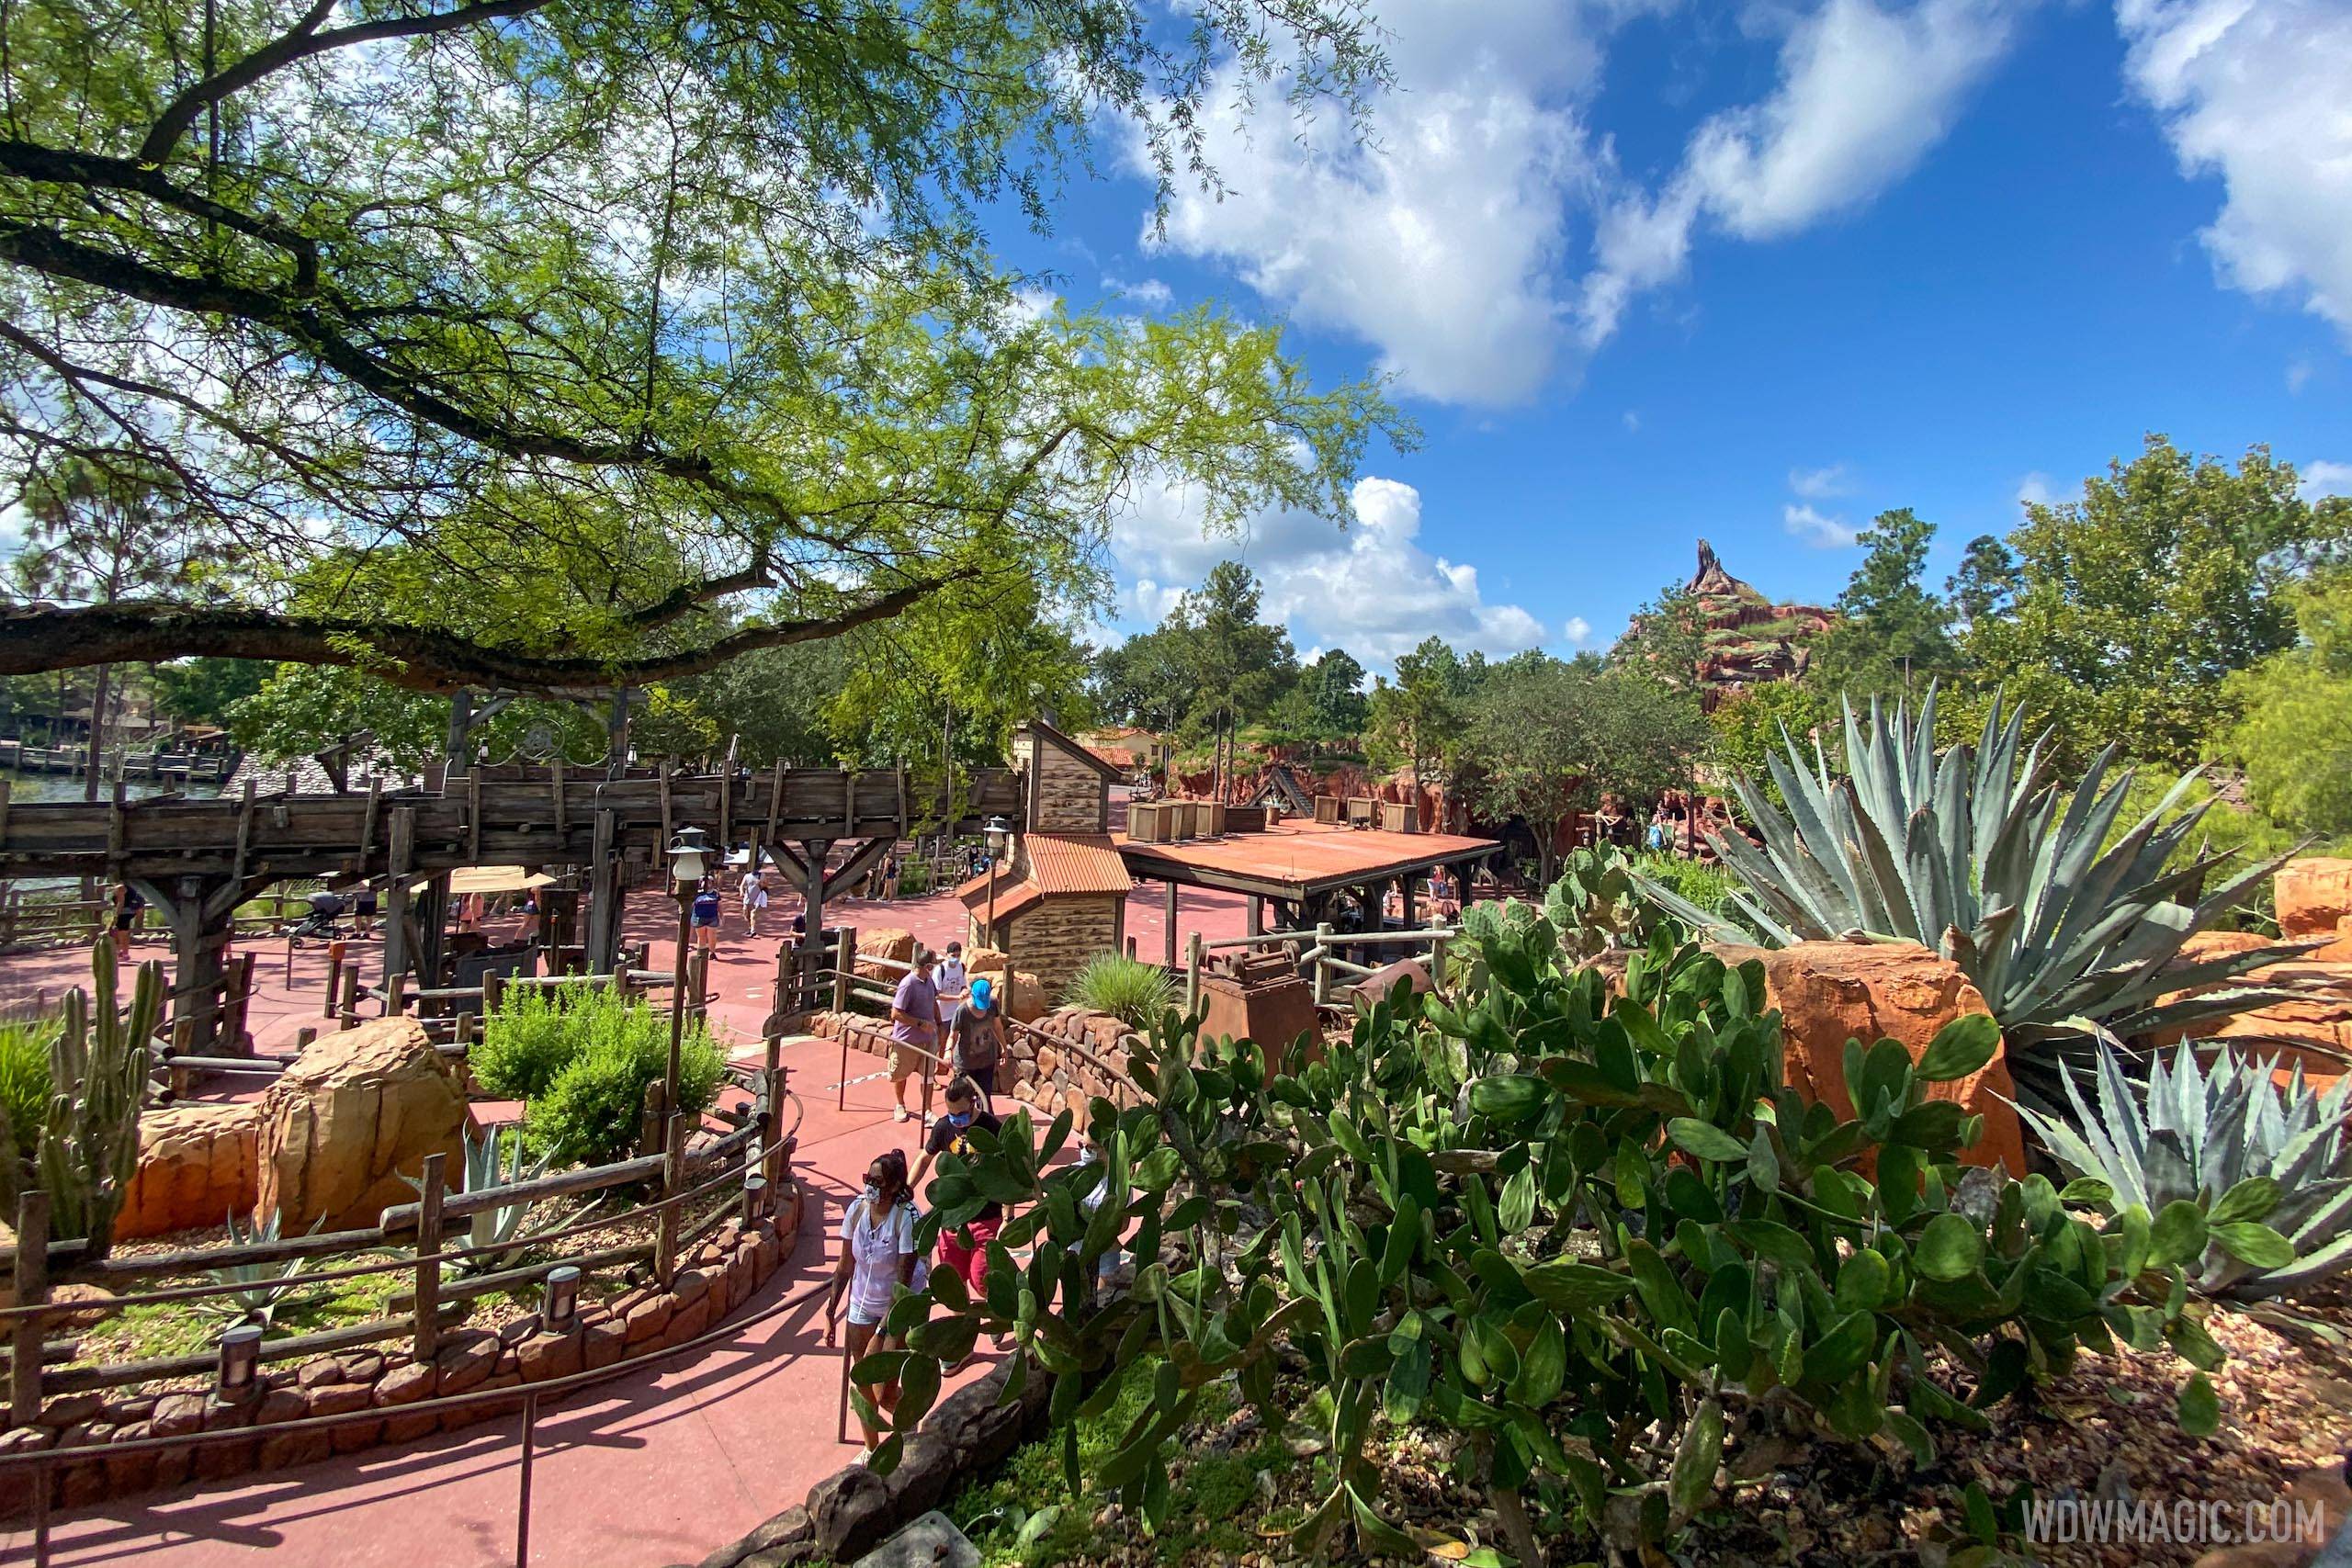 Frontierland viewed from Big Thunder Mountain